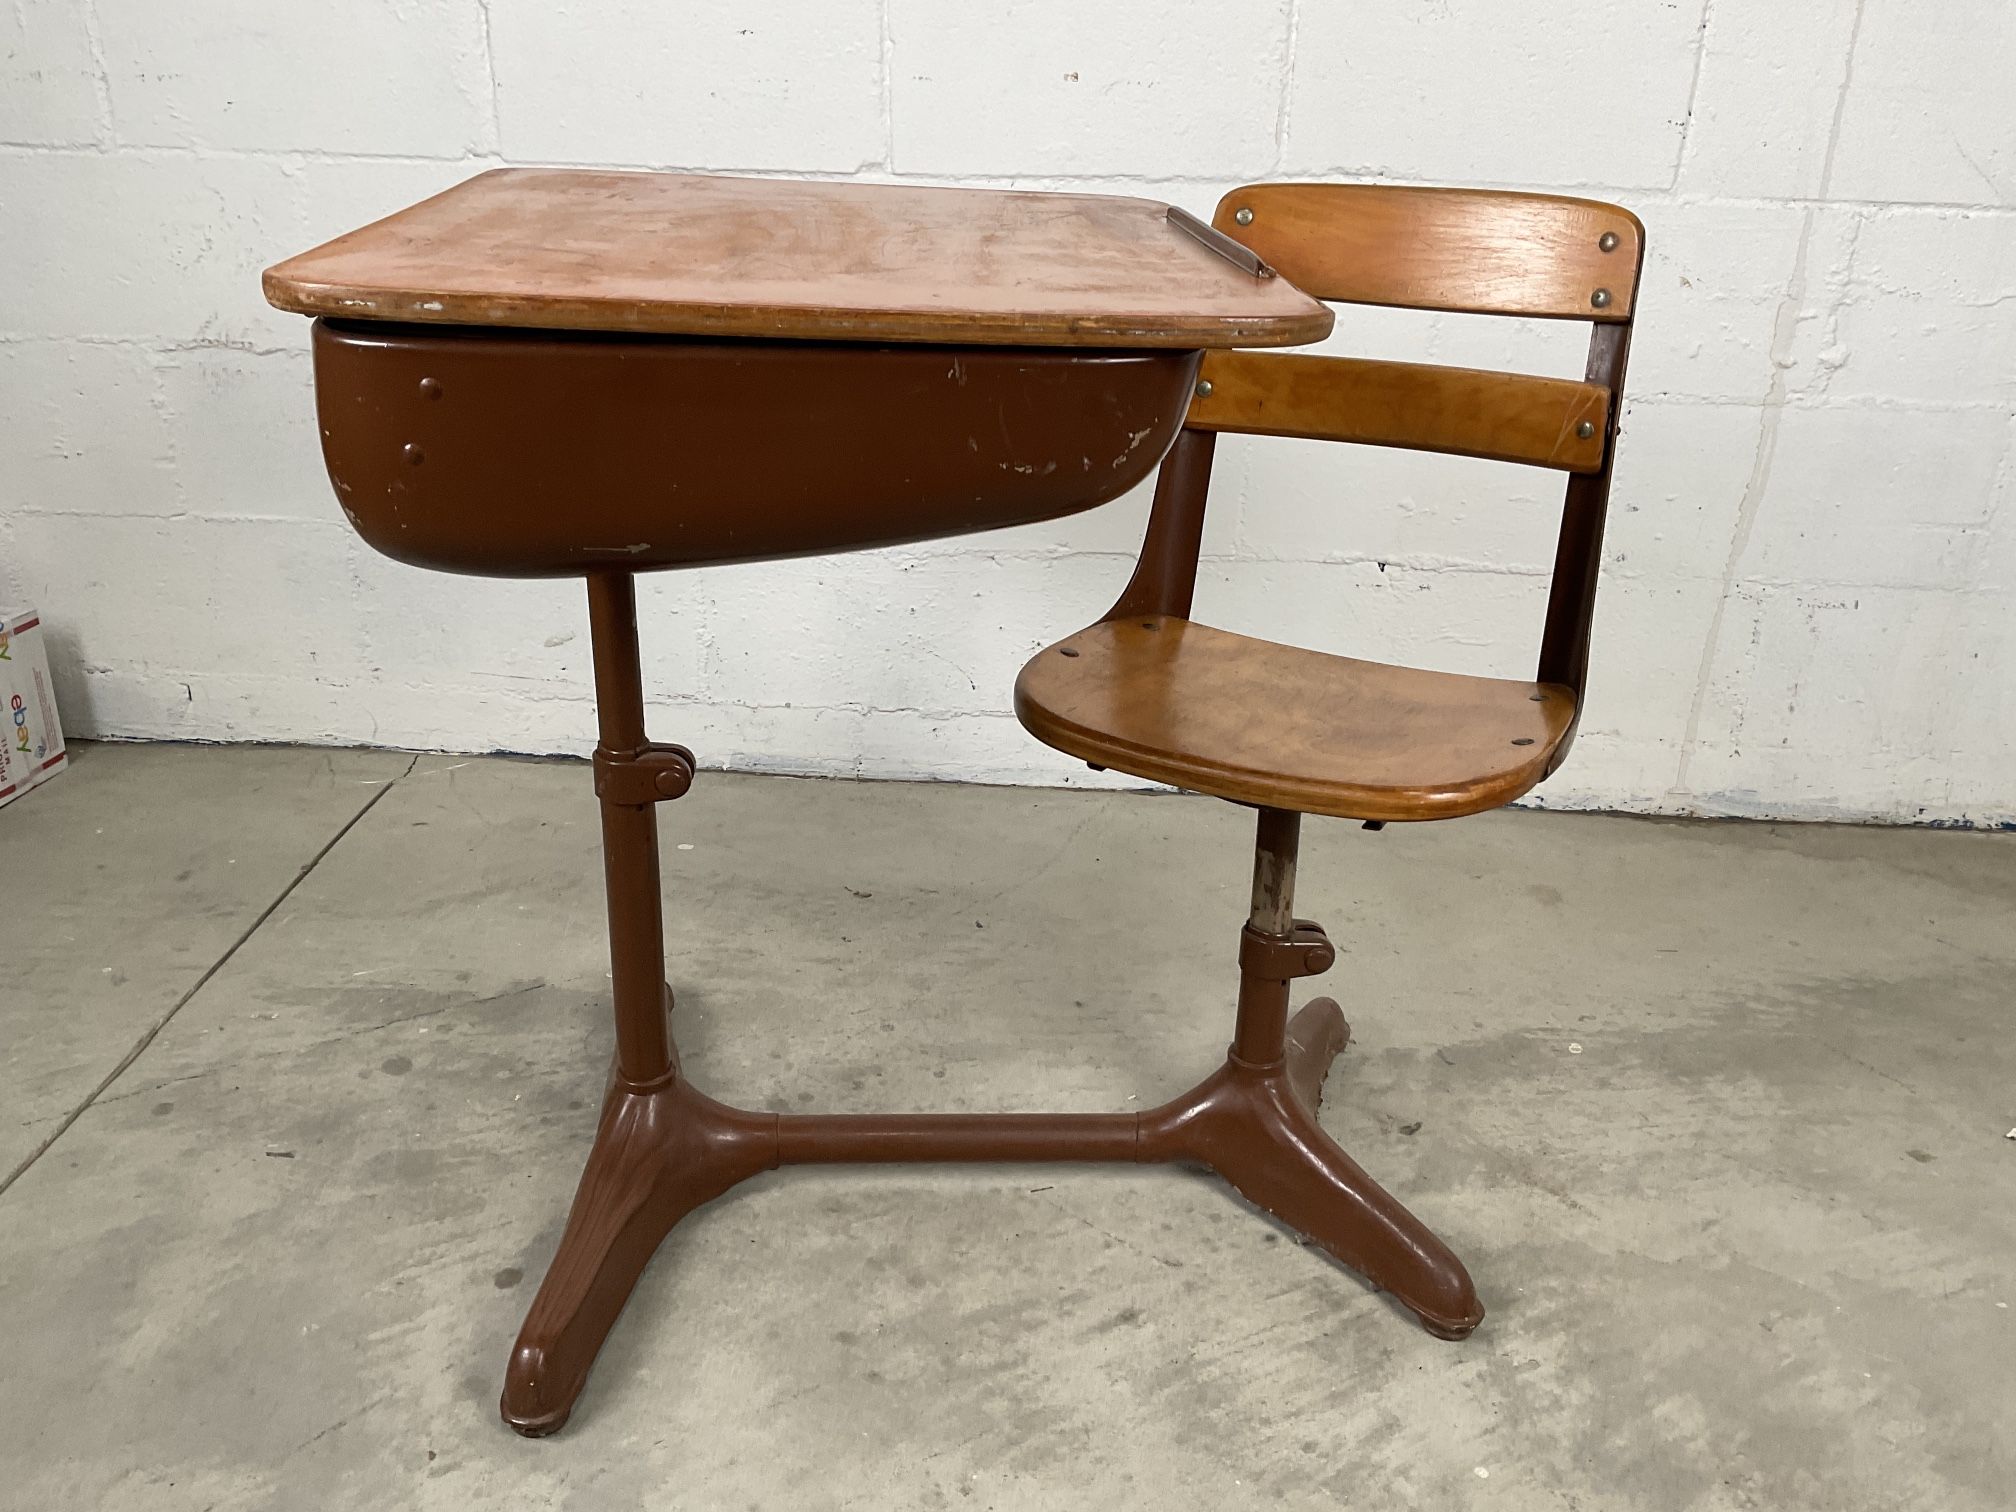 Vintage Kids Mid-Century Wood & Metal Industrial School Desk for Students W/ Storage 🚚 Available